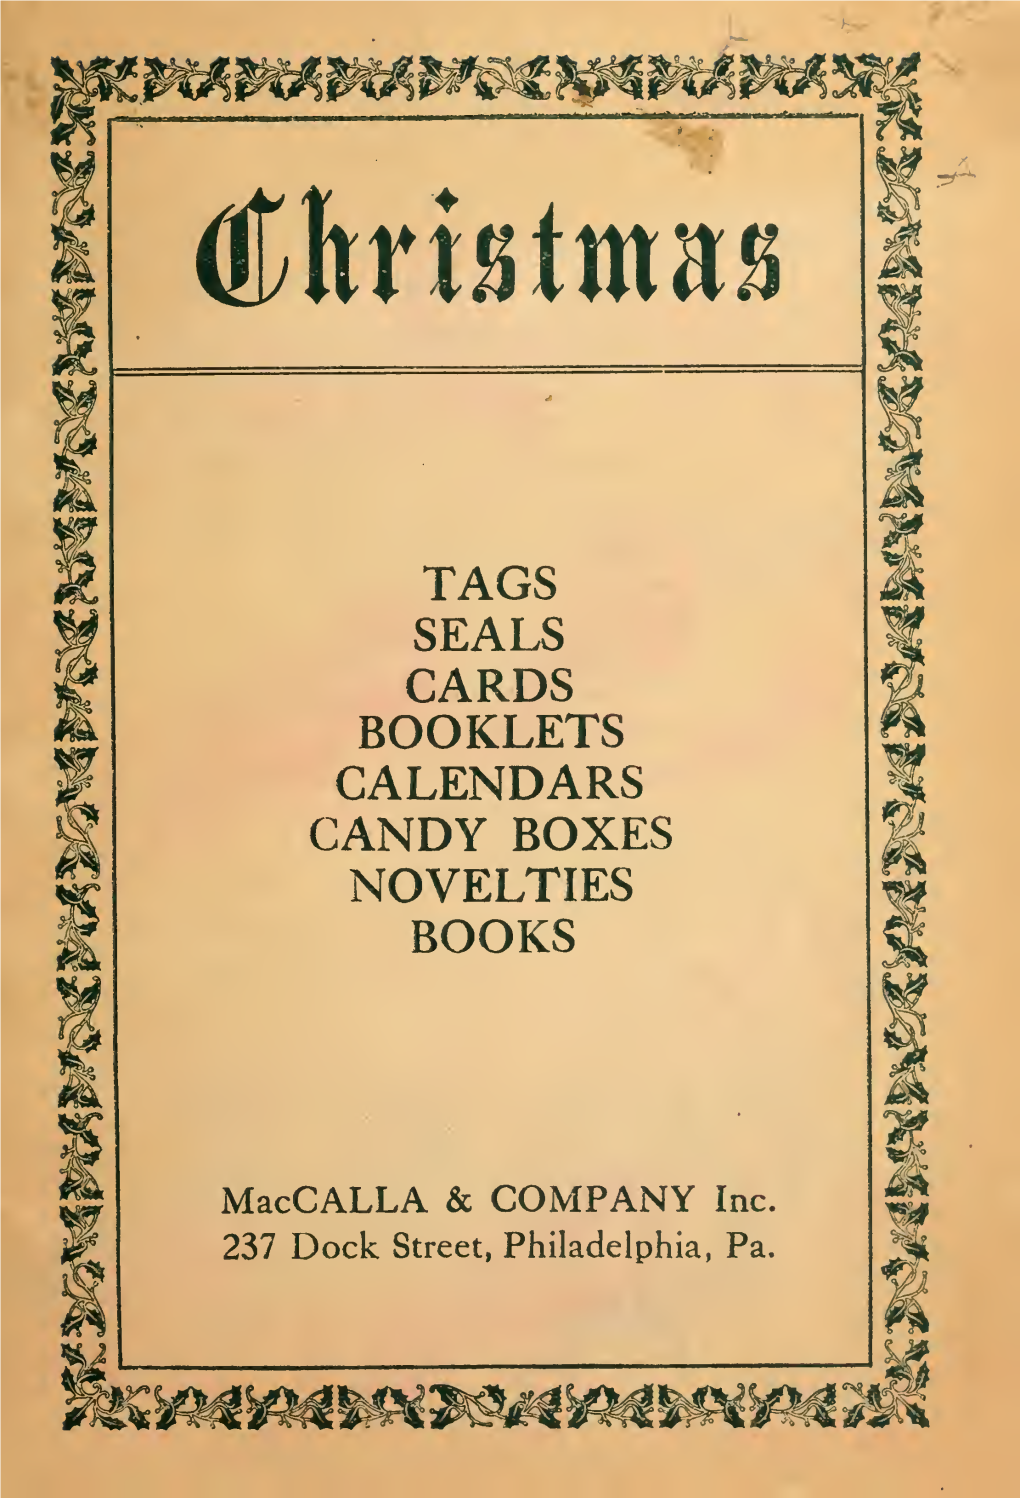 Christmas : Tags, Seals, Cards, Booklets, Calendars, Candy Boxes, Novelties, Books